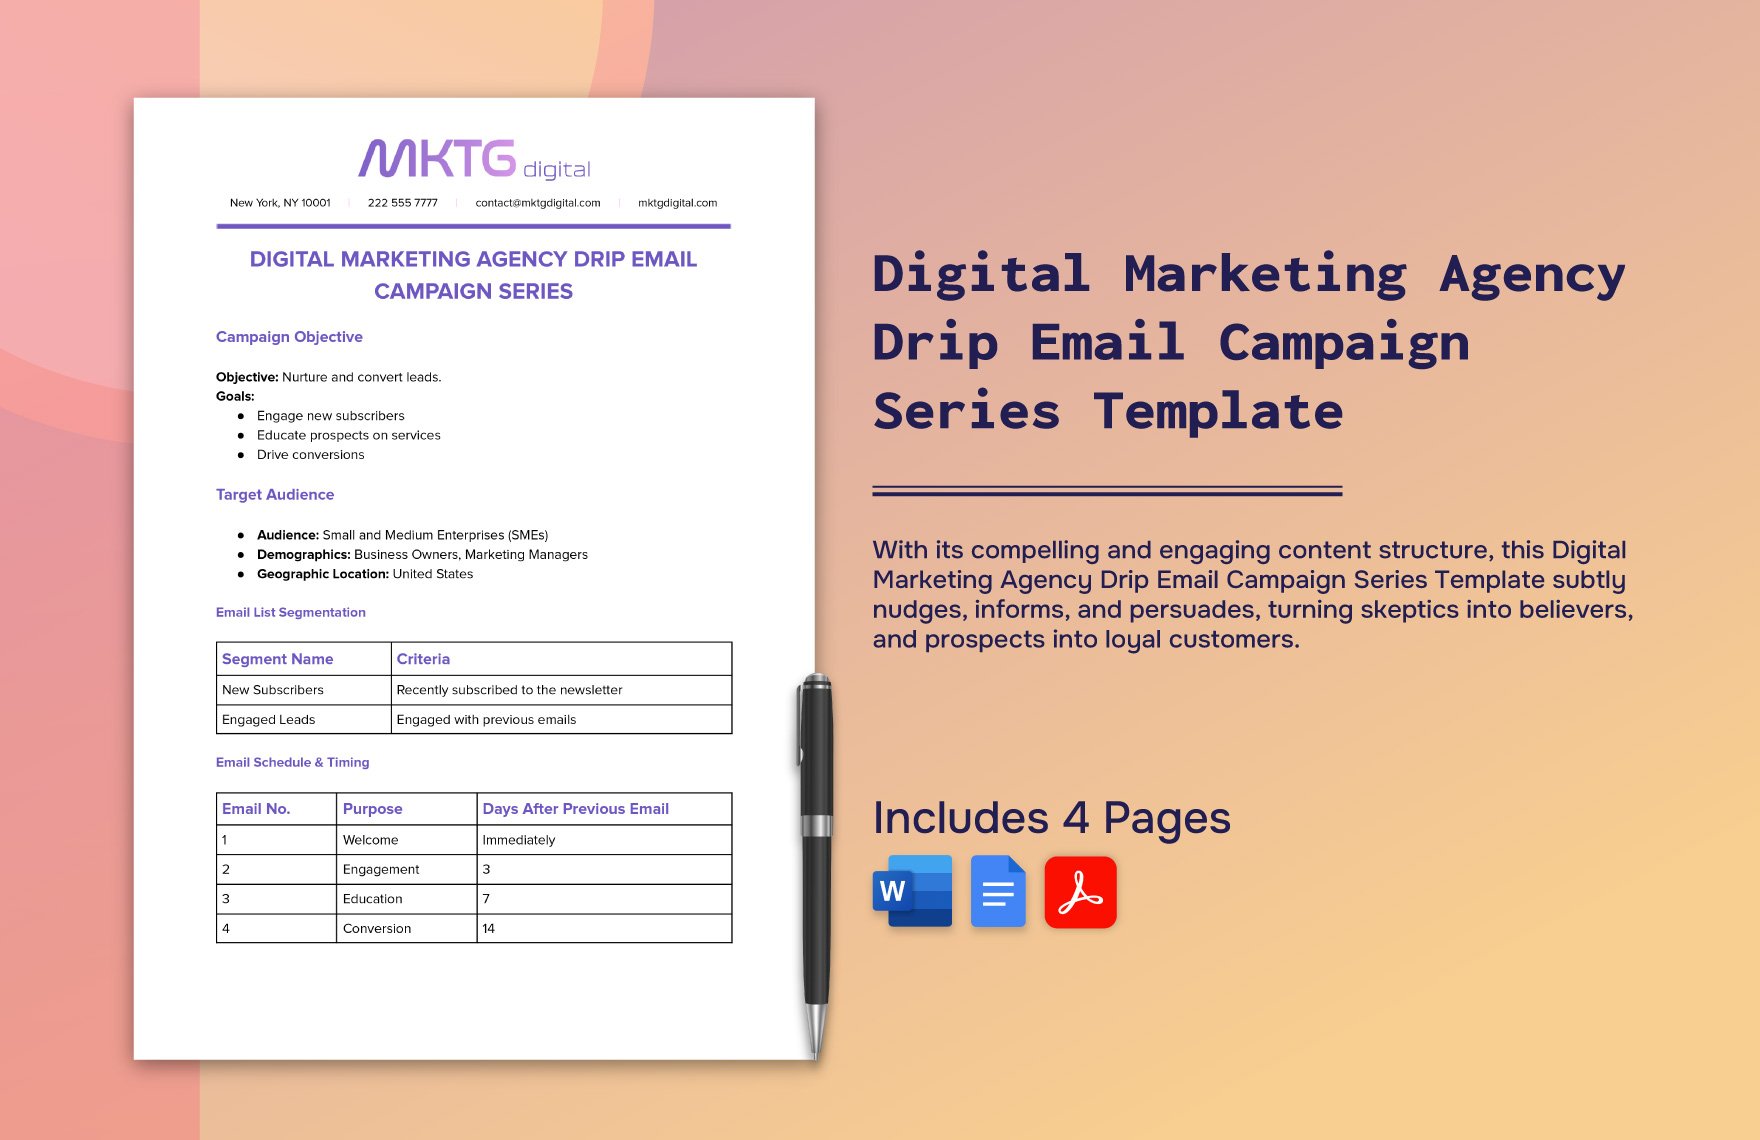 Digital Marketing Agency Drip Email Campaign Series Template in Word, Google Docs, PDF